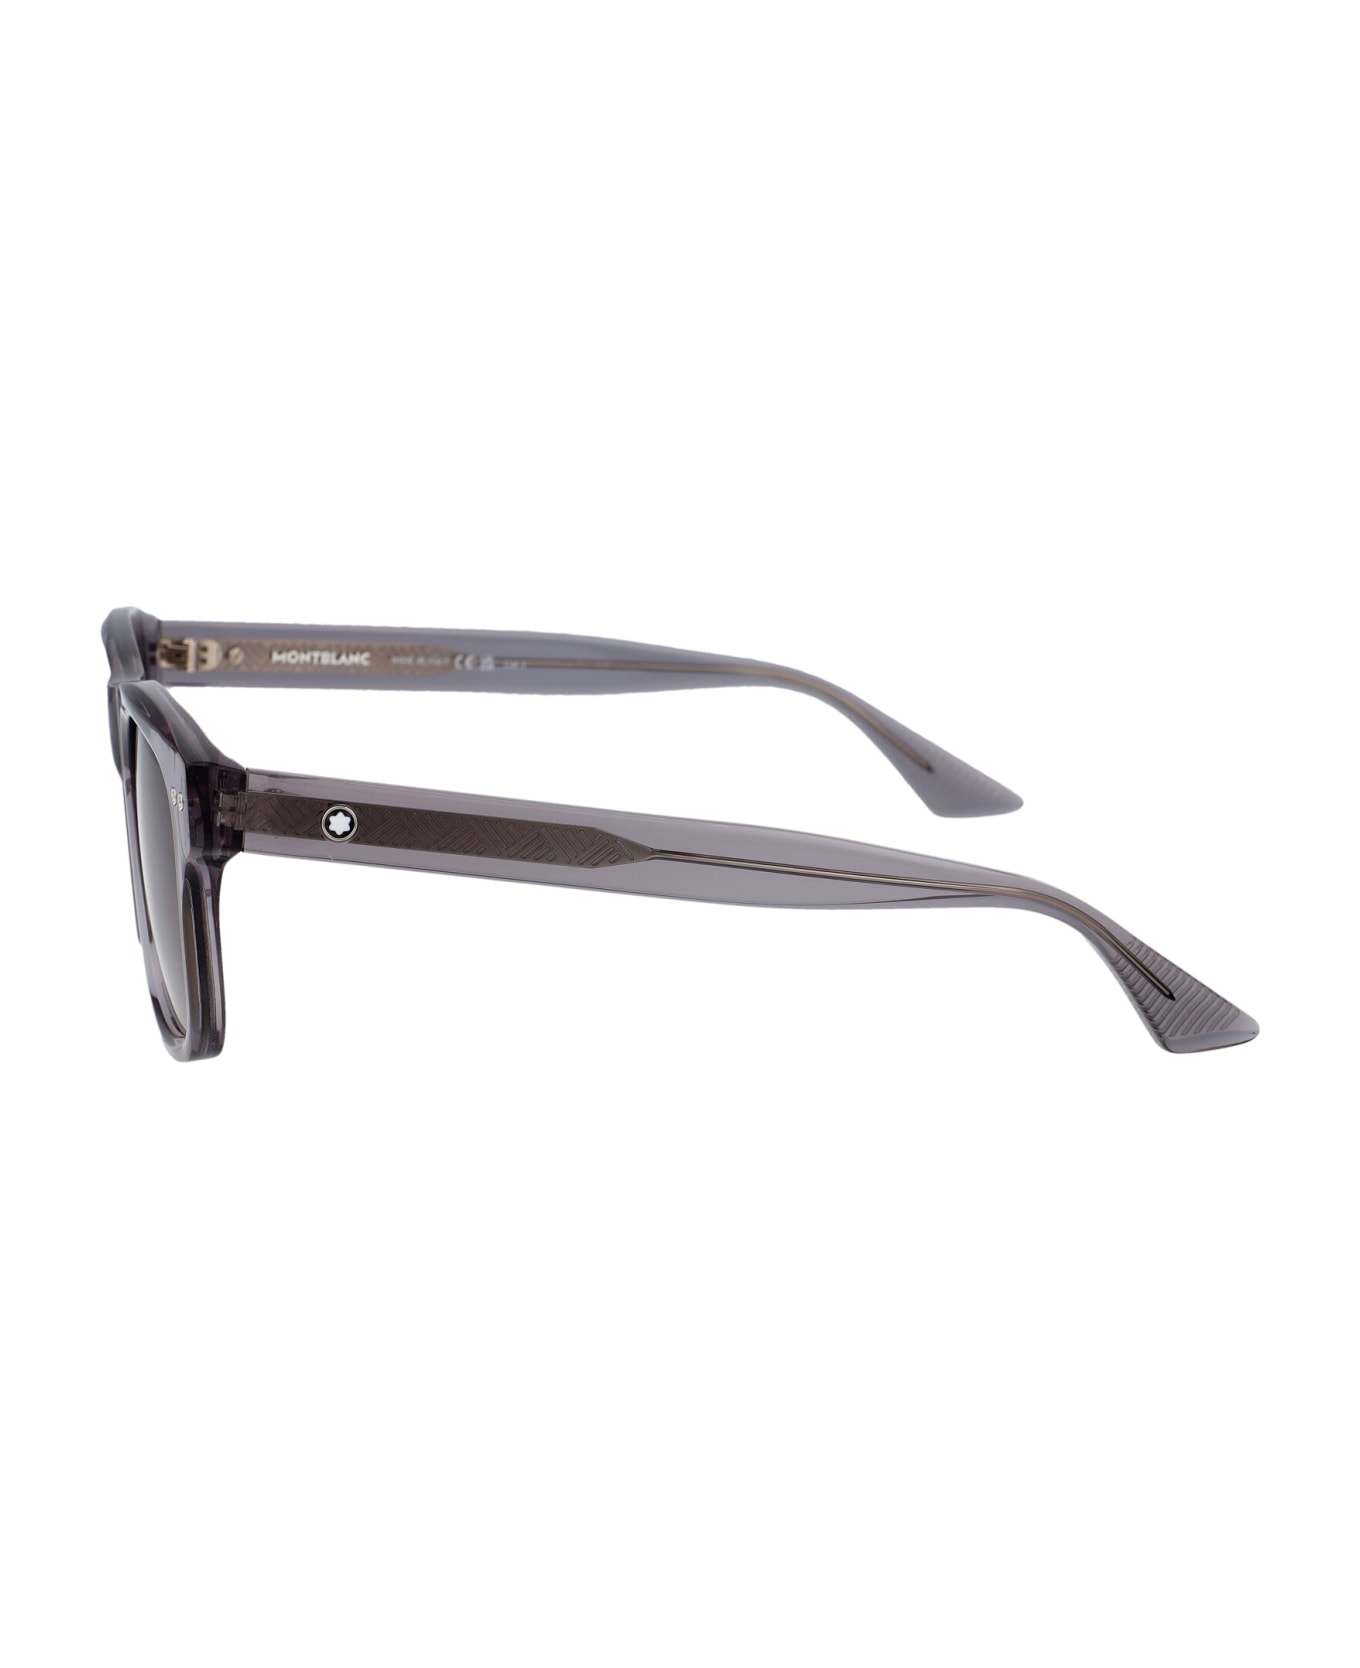 Montblanc Mb0319s Sunglasses - 004 GREY GREY BROWN